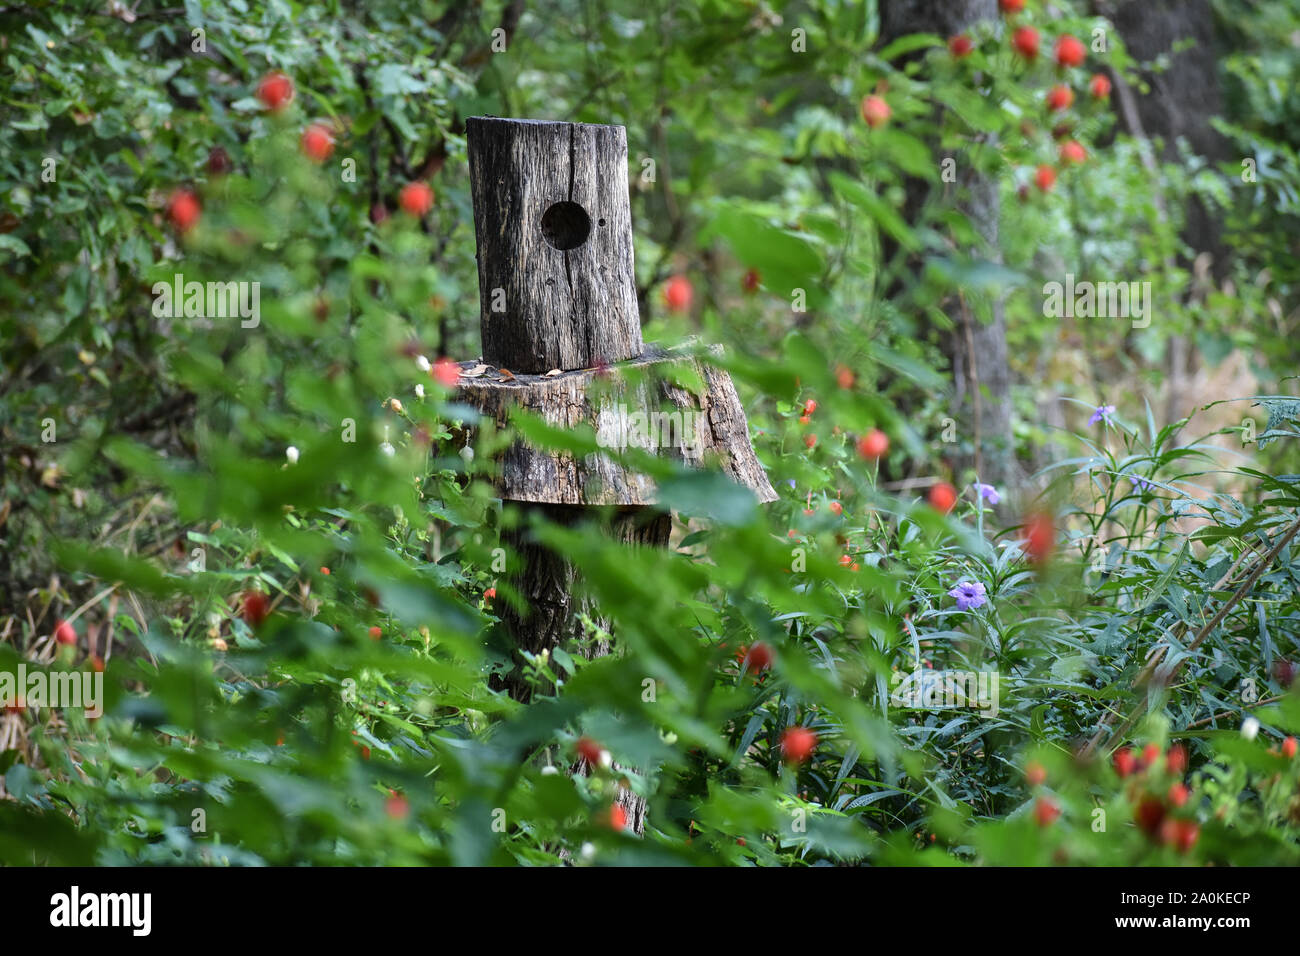 Cute bird feeder surrounded by flowers Stock Photo